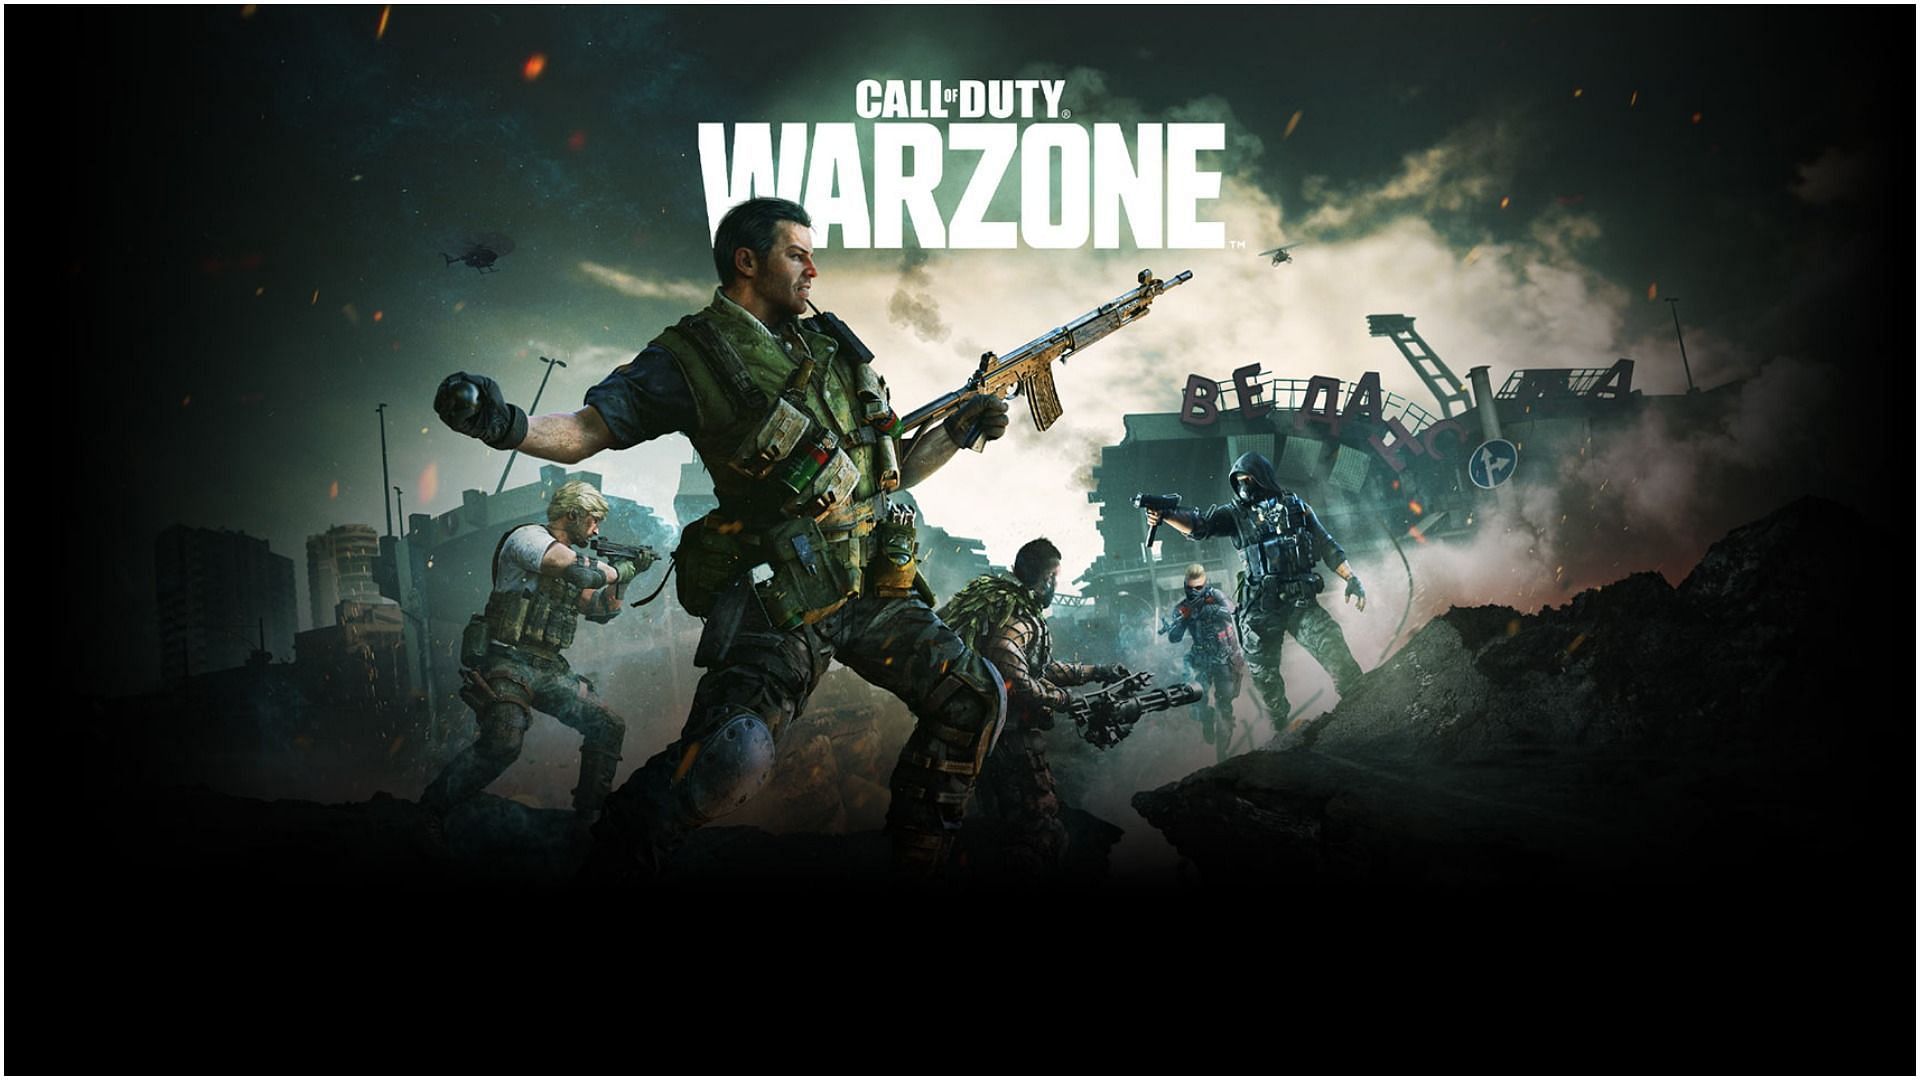 Fans have made their opinions clear about Warzone potentially getting crossplay (Image via Activision)